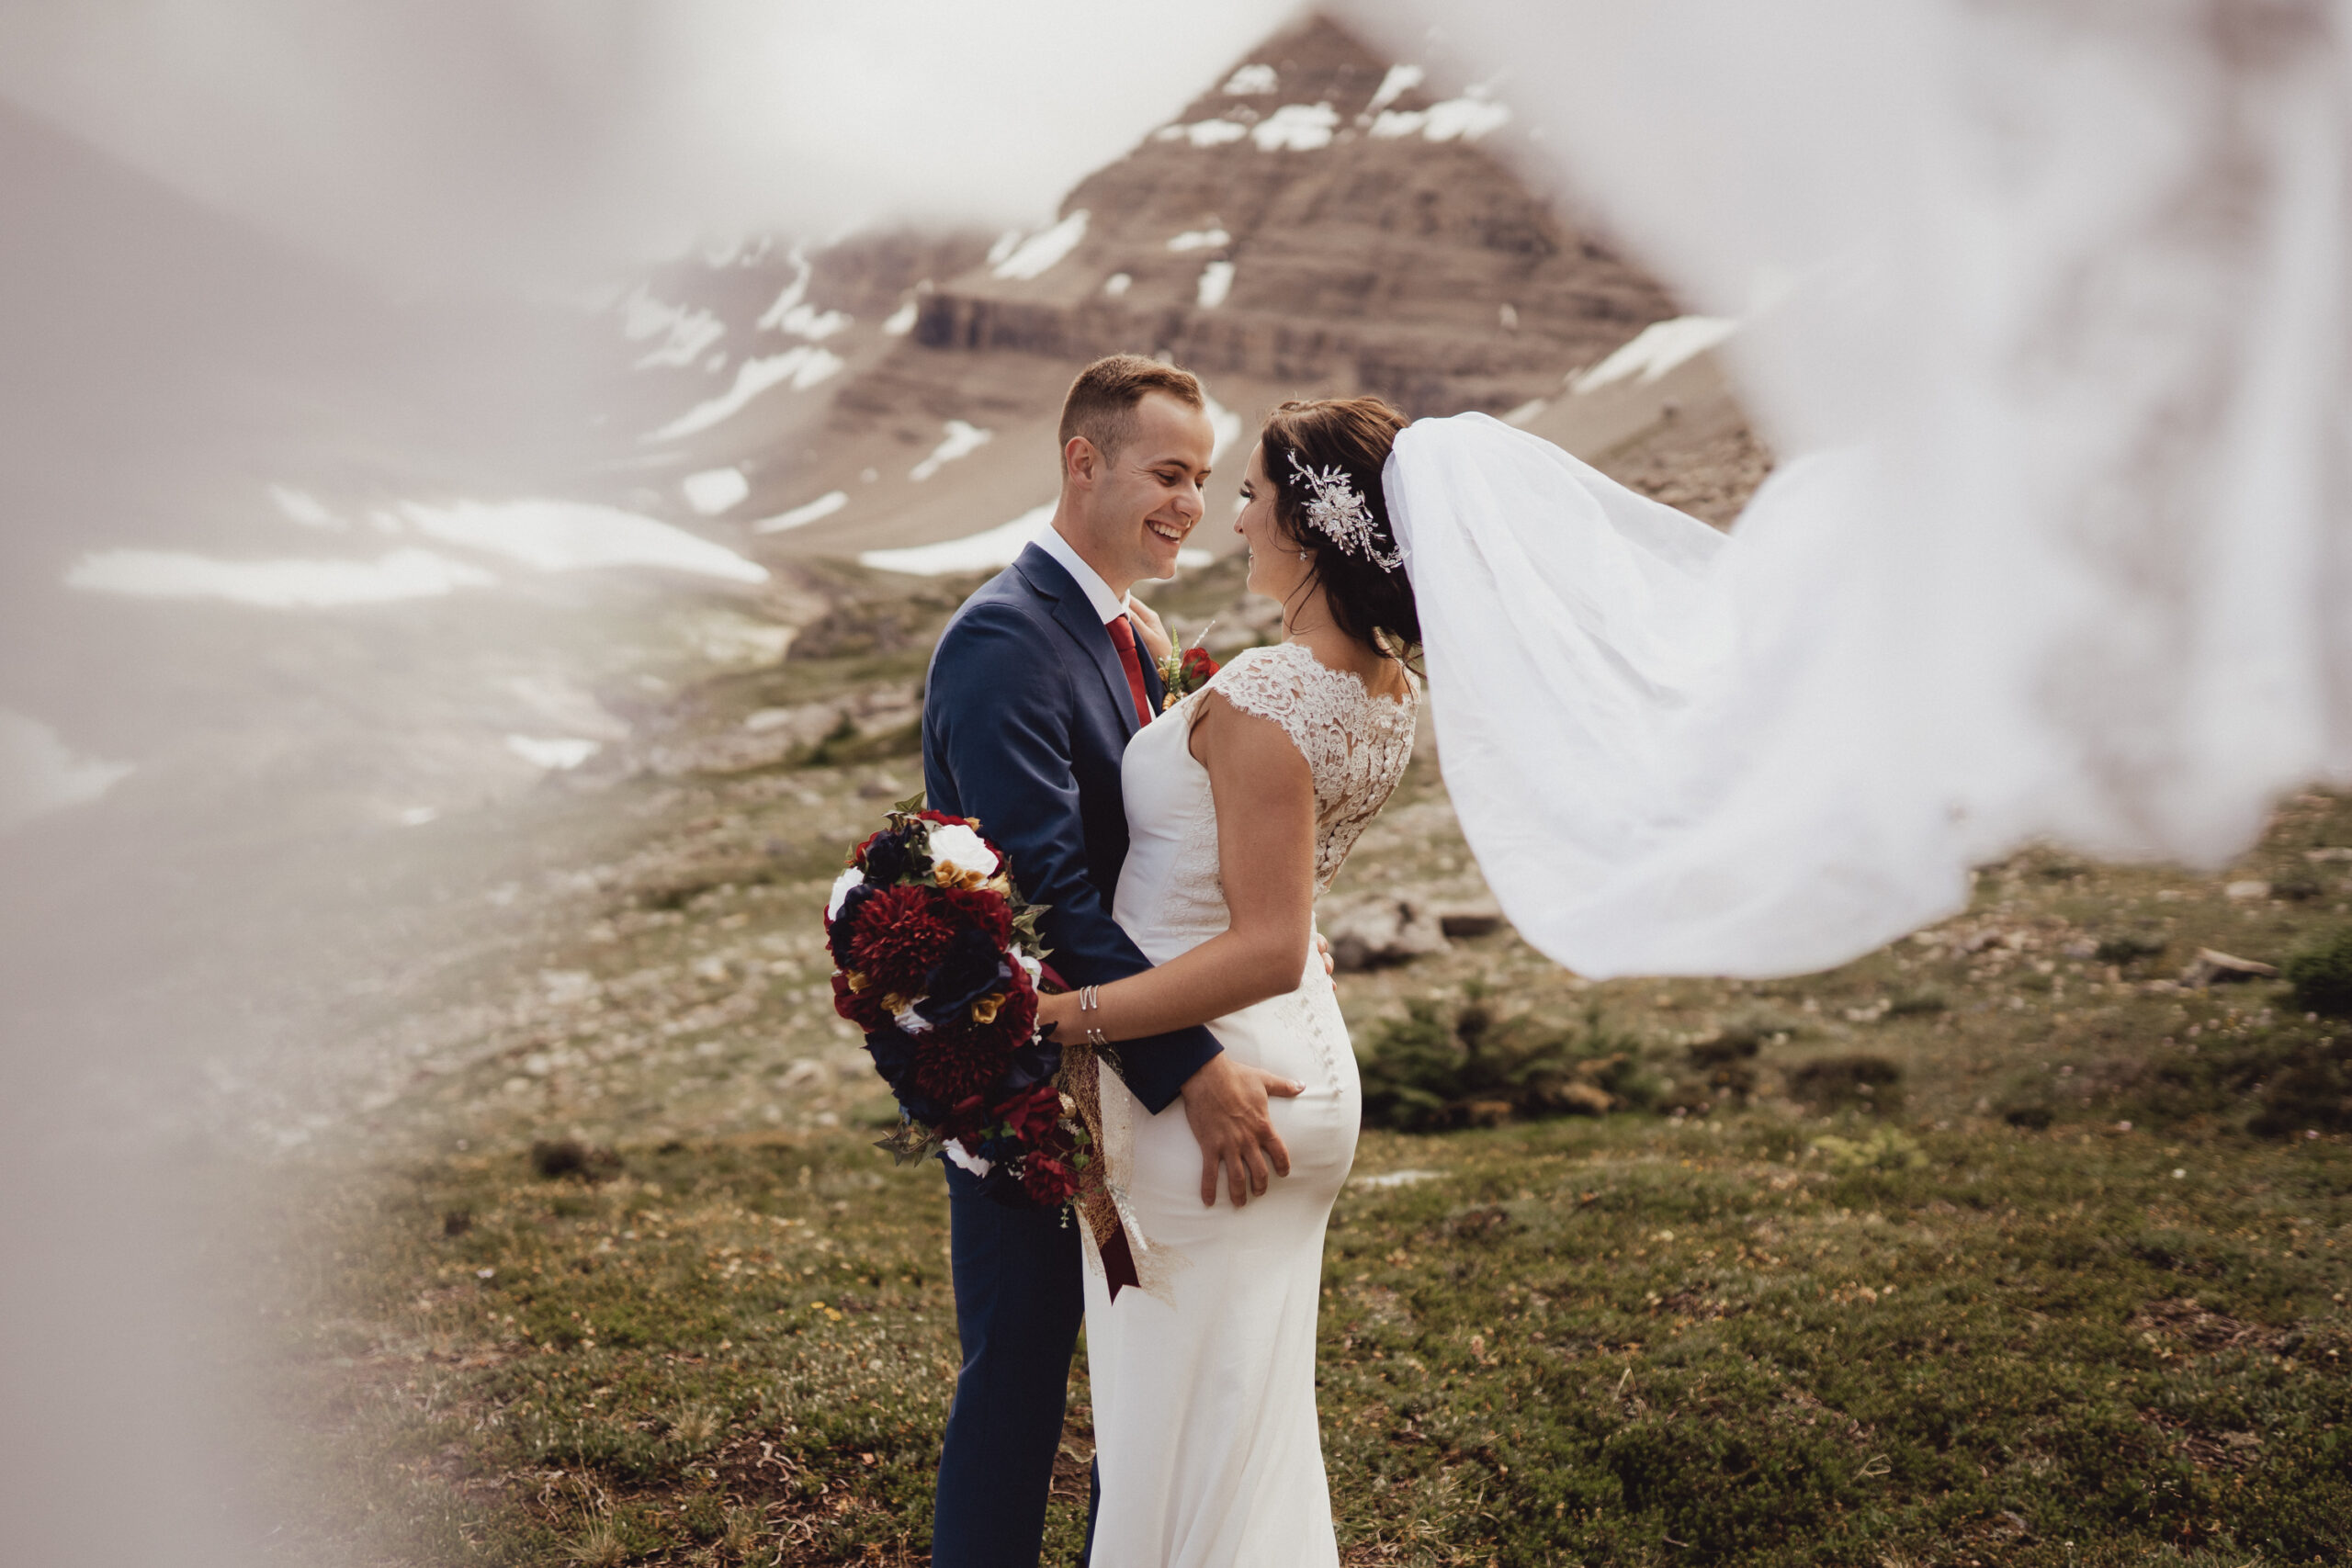 Bride and groom kissing in front of Rocky Mountain landscape